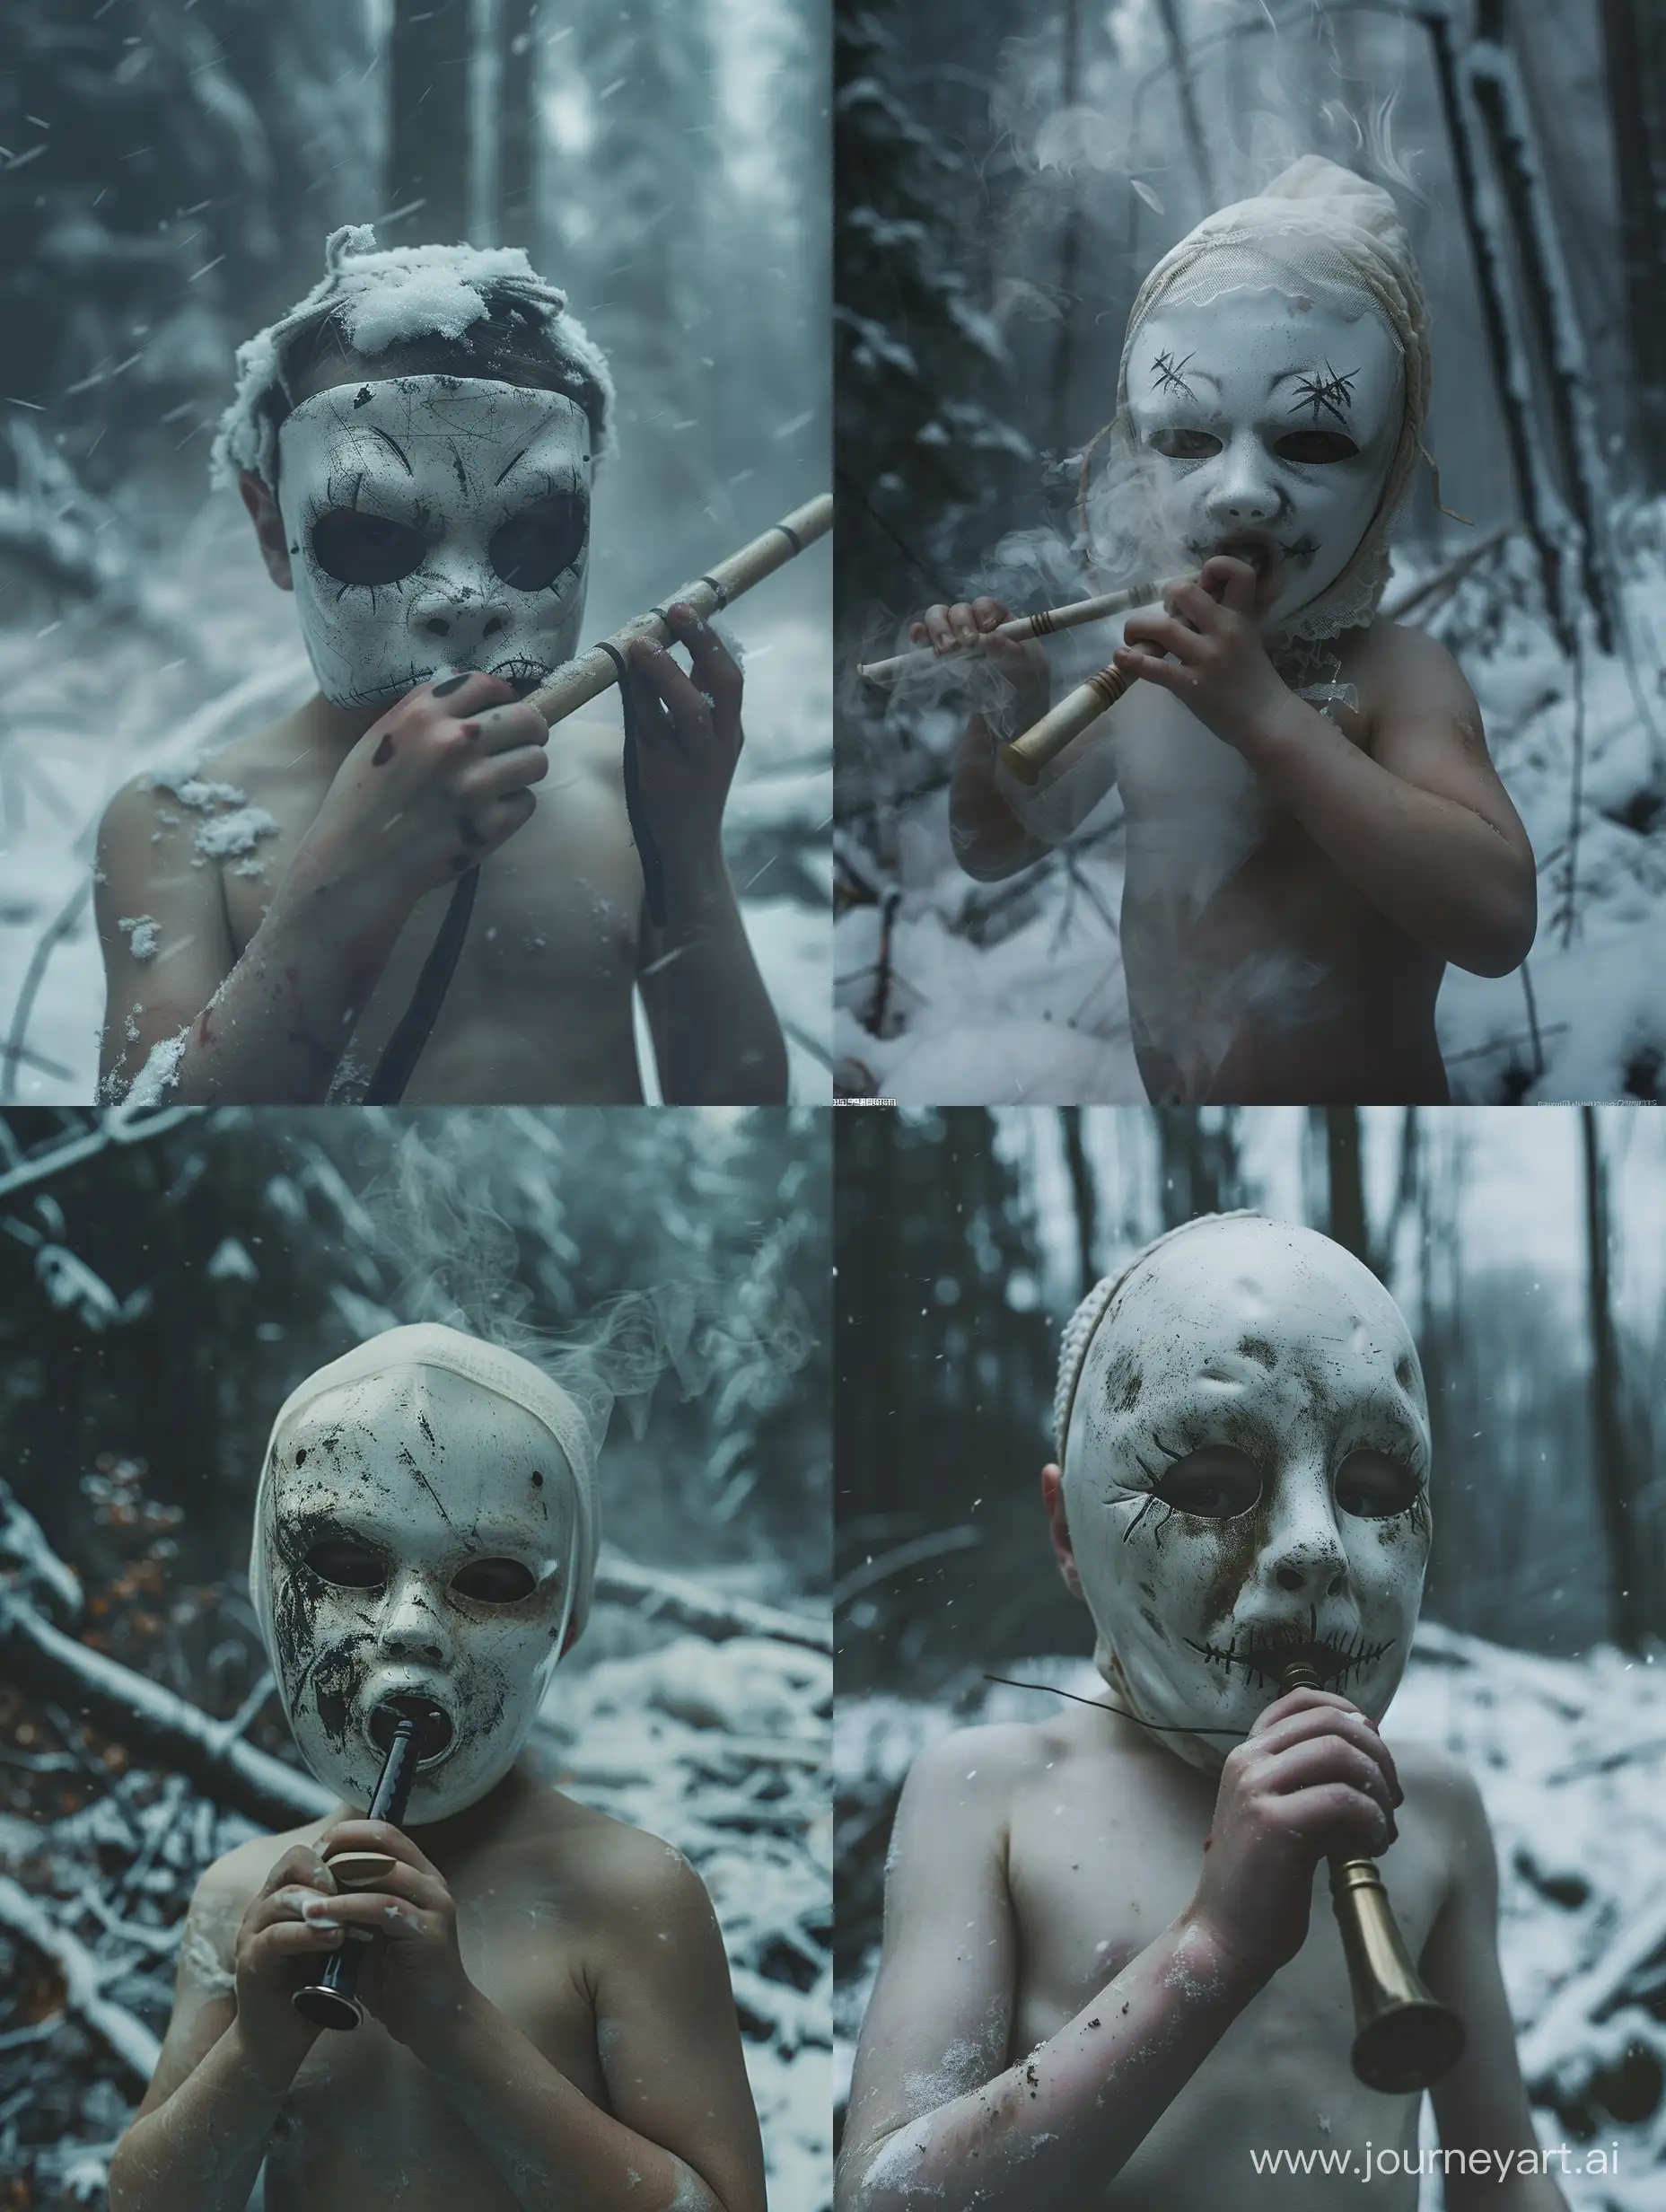 Eerie-Child-Musician-in-Snowy-Forest-with-Scary-White-Mask